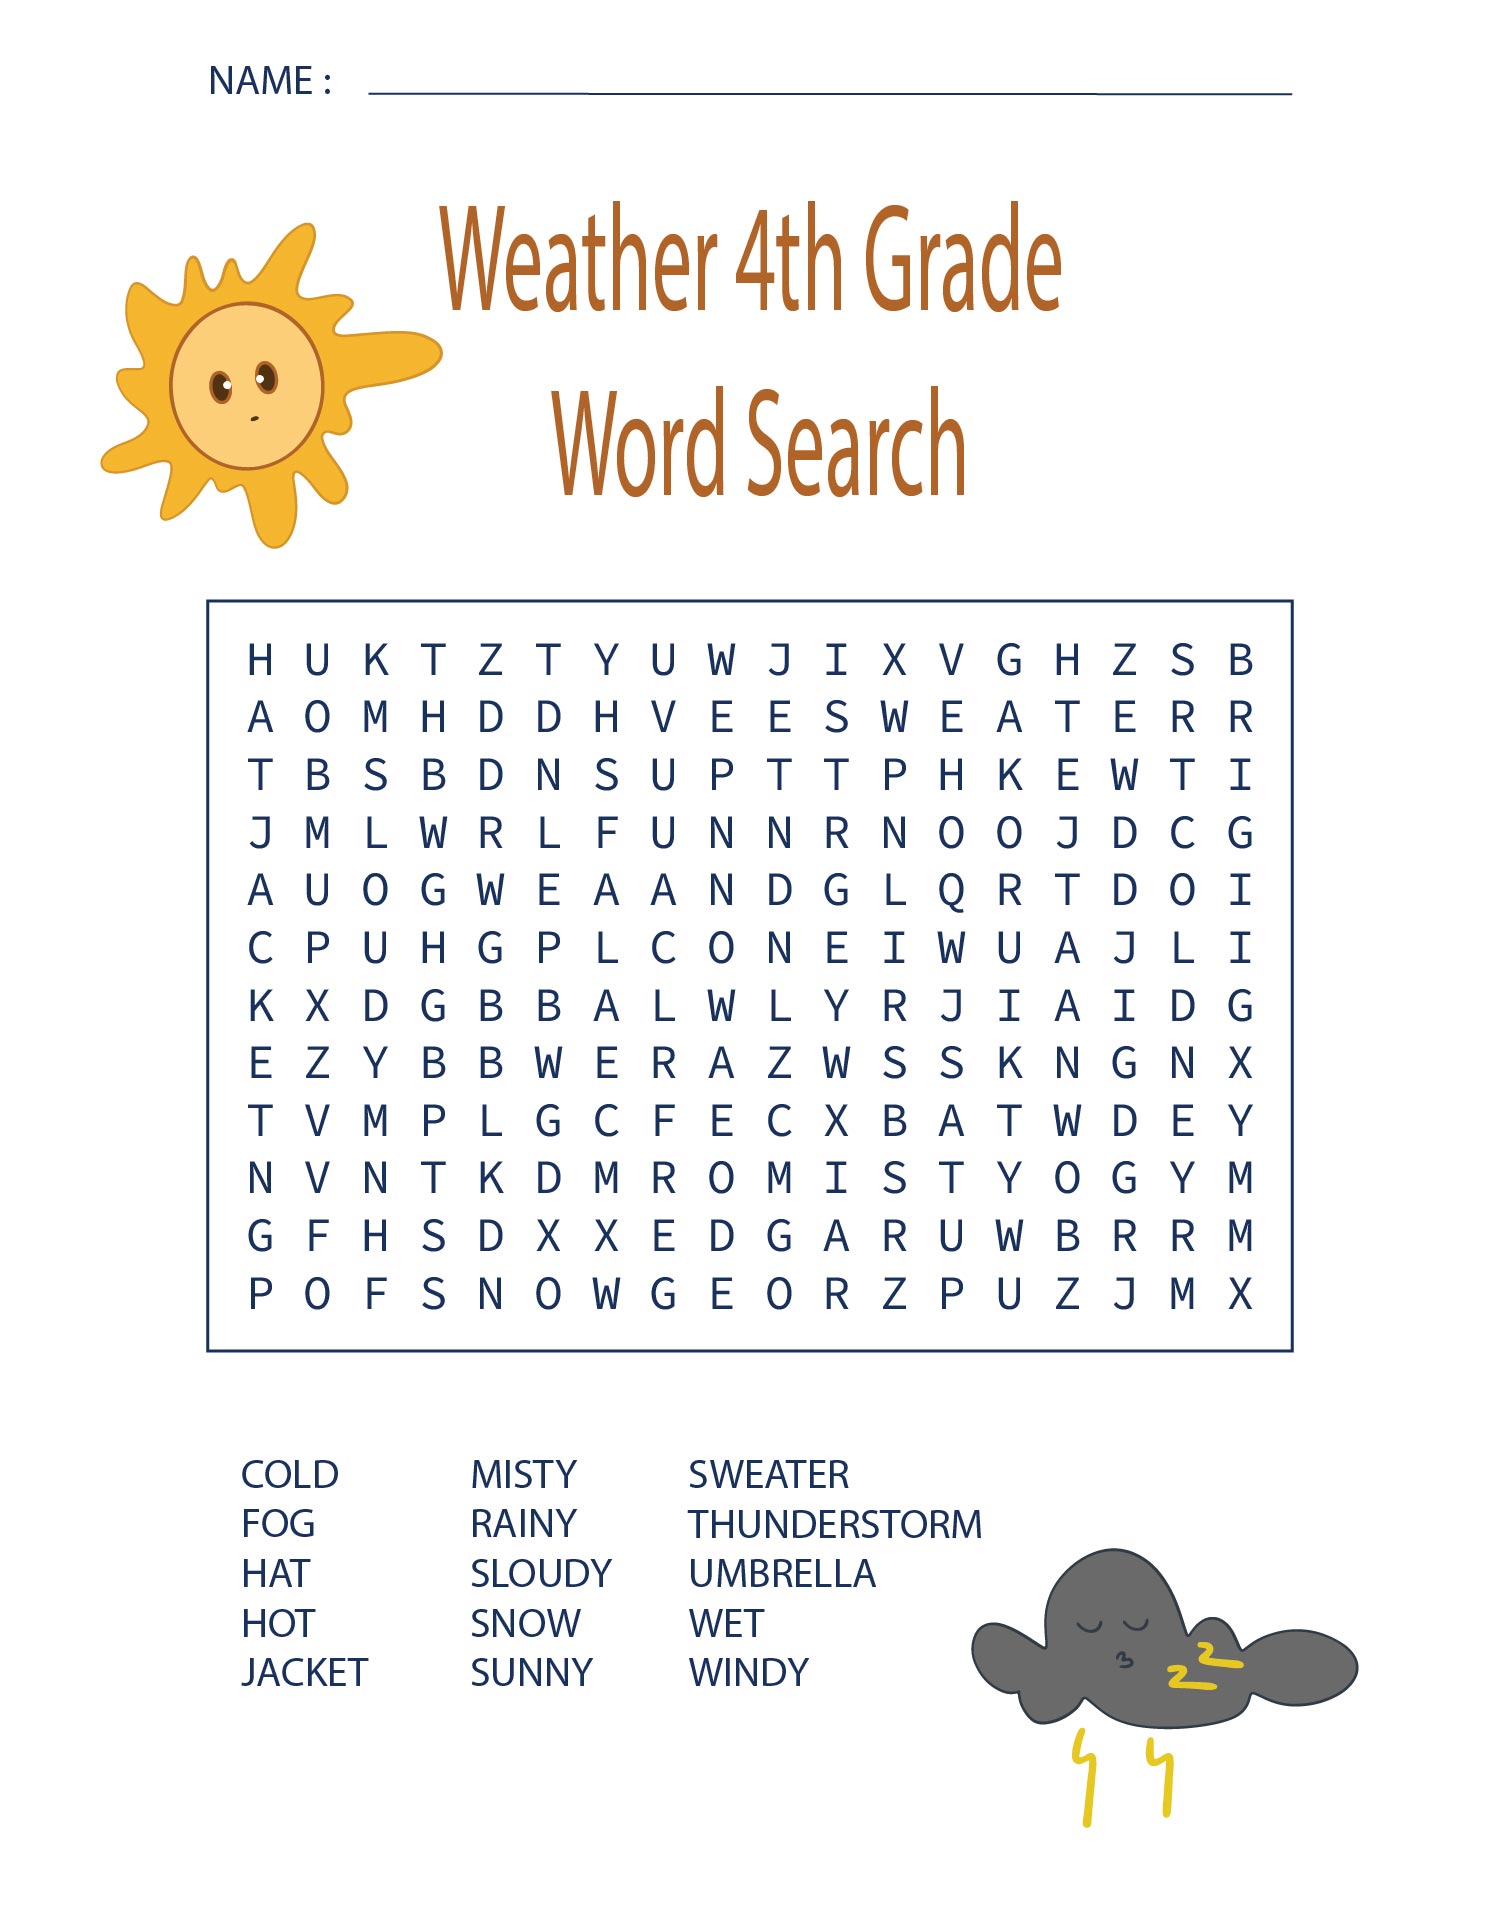 Weather 4th Grade Word Search Printable